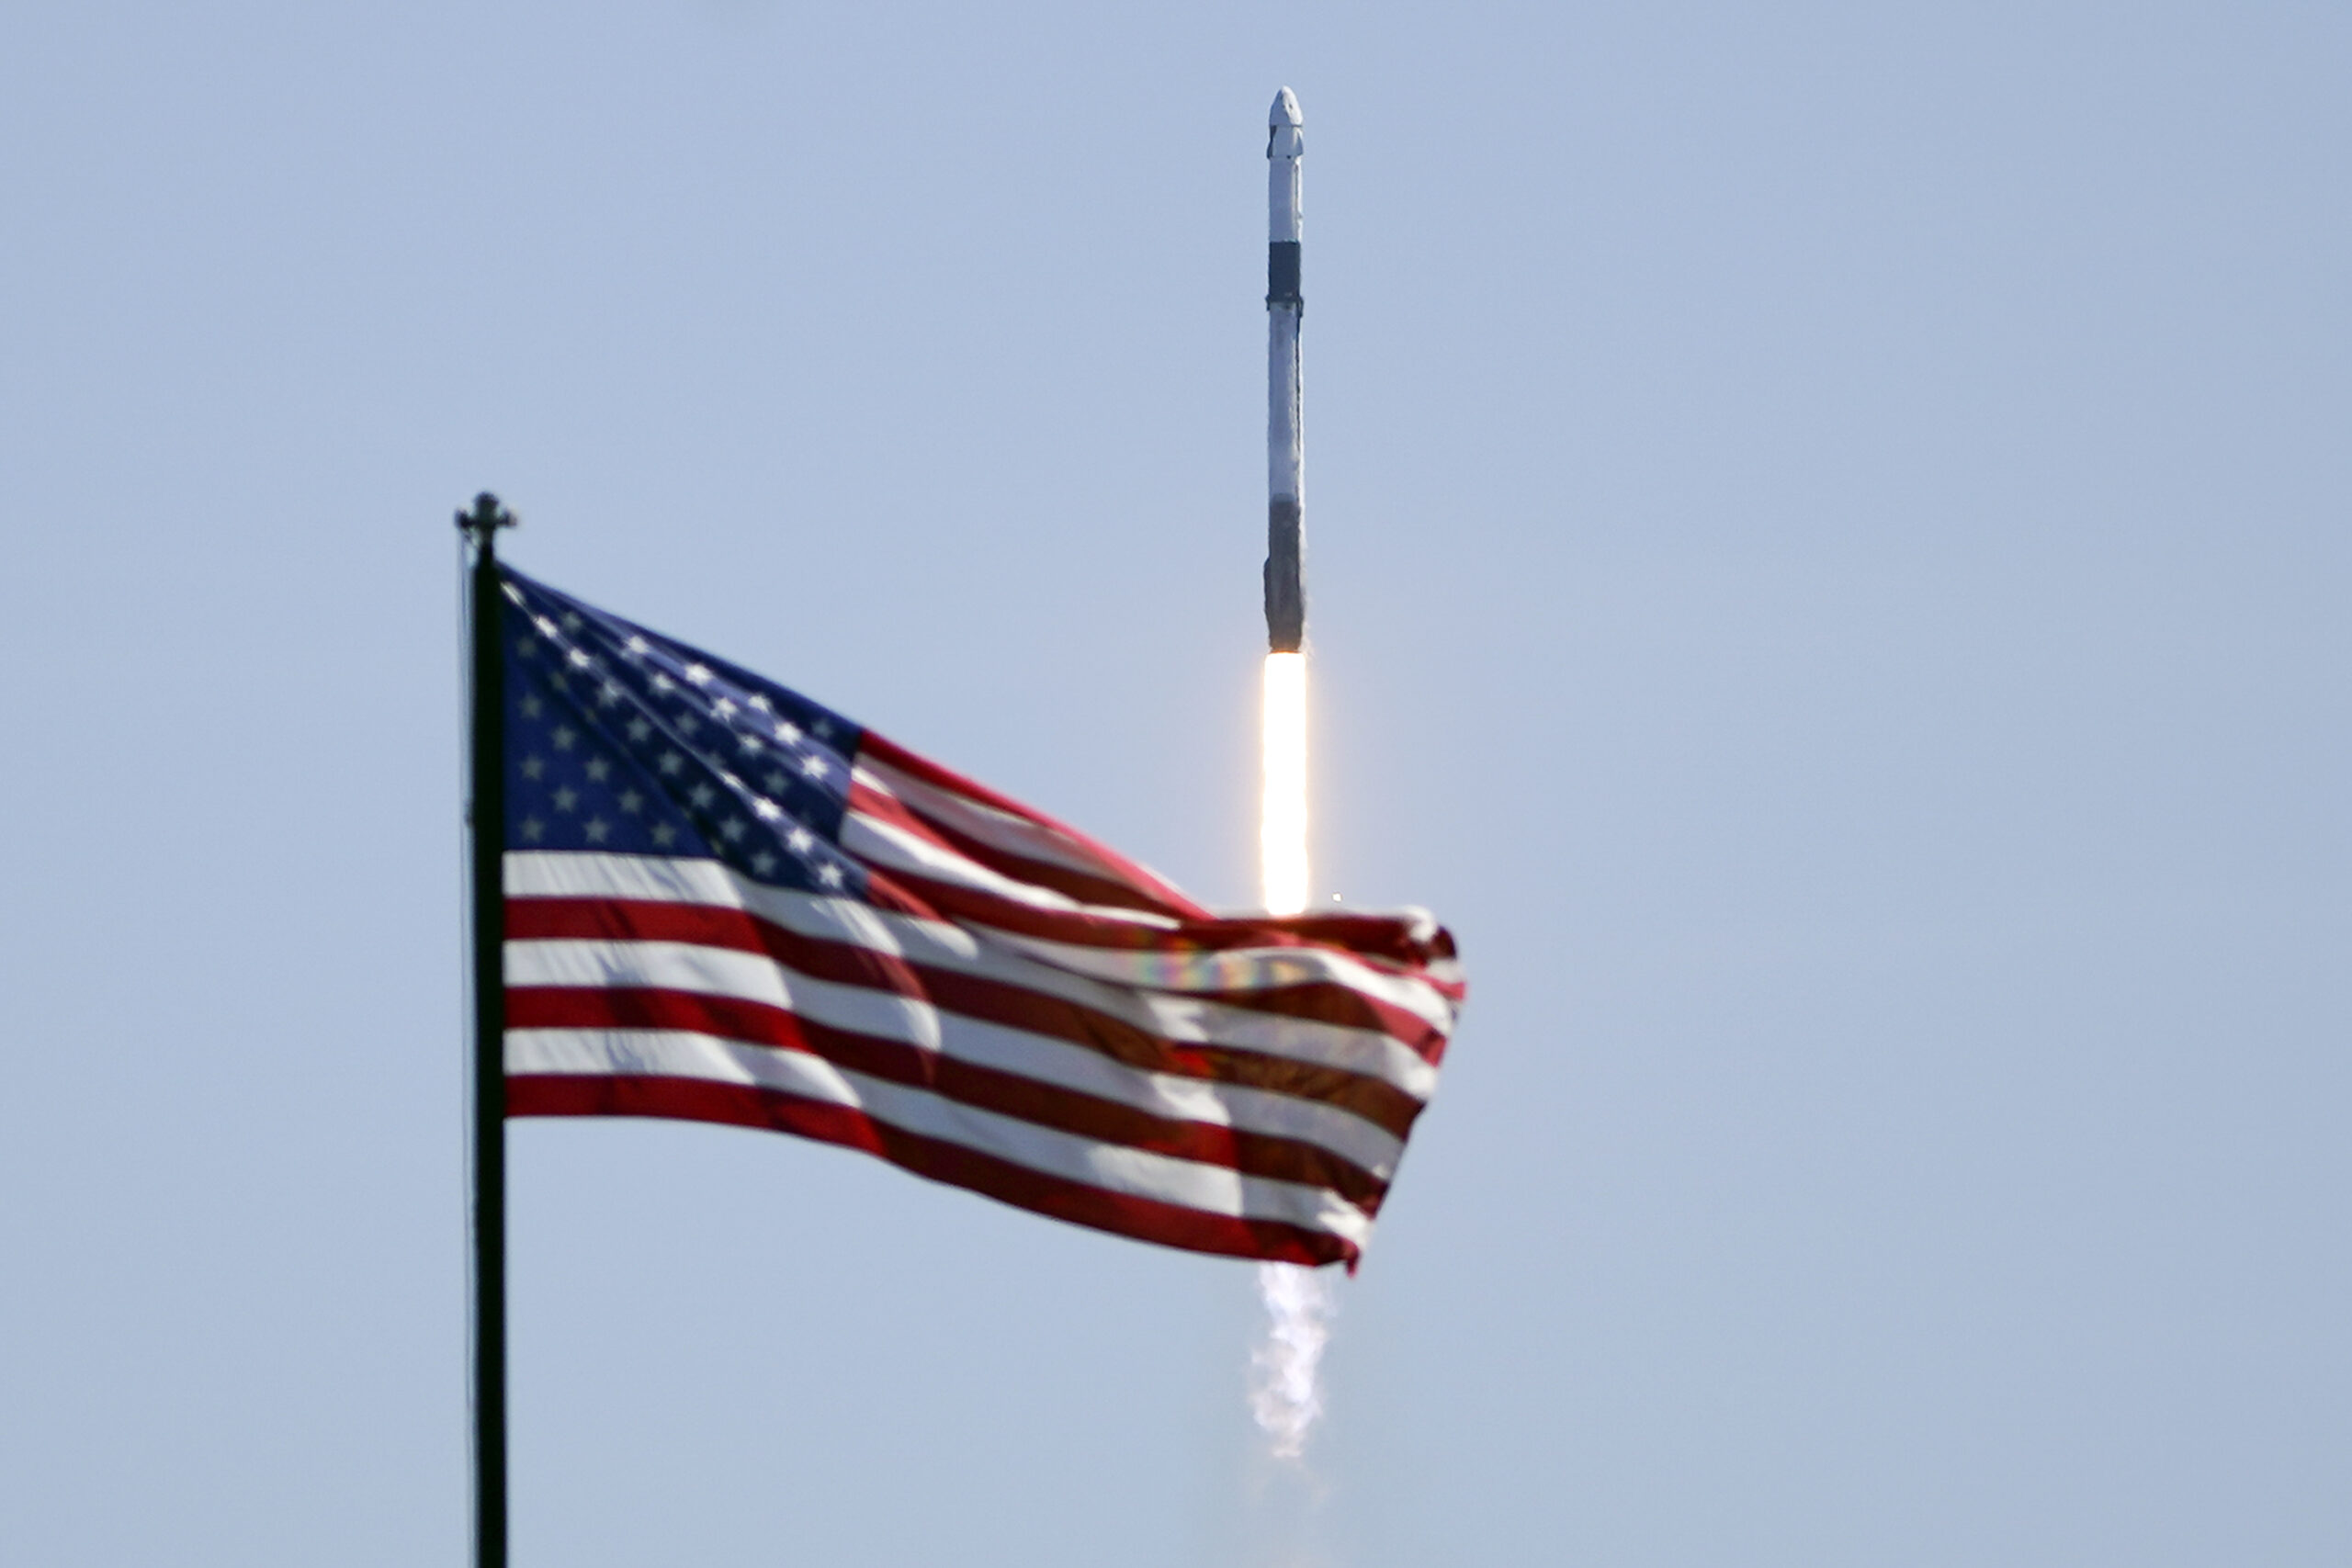 A SpaceX Falcon 9 rocket lifts off from pad 39A at the Kennedy Space Center in Cape Canaveral, Fla., Friday, April 8, 2022. (AP Photo/John Raoux)